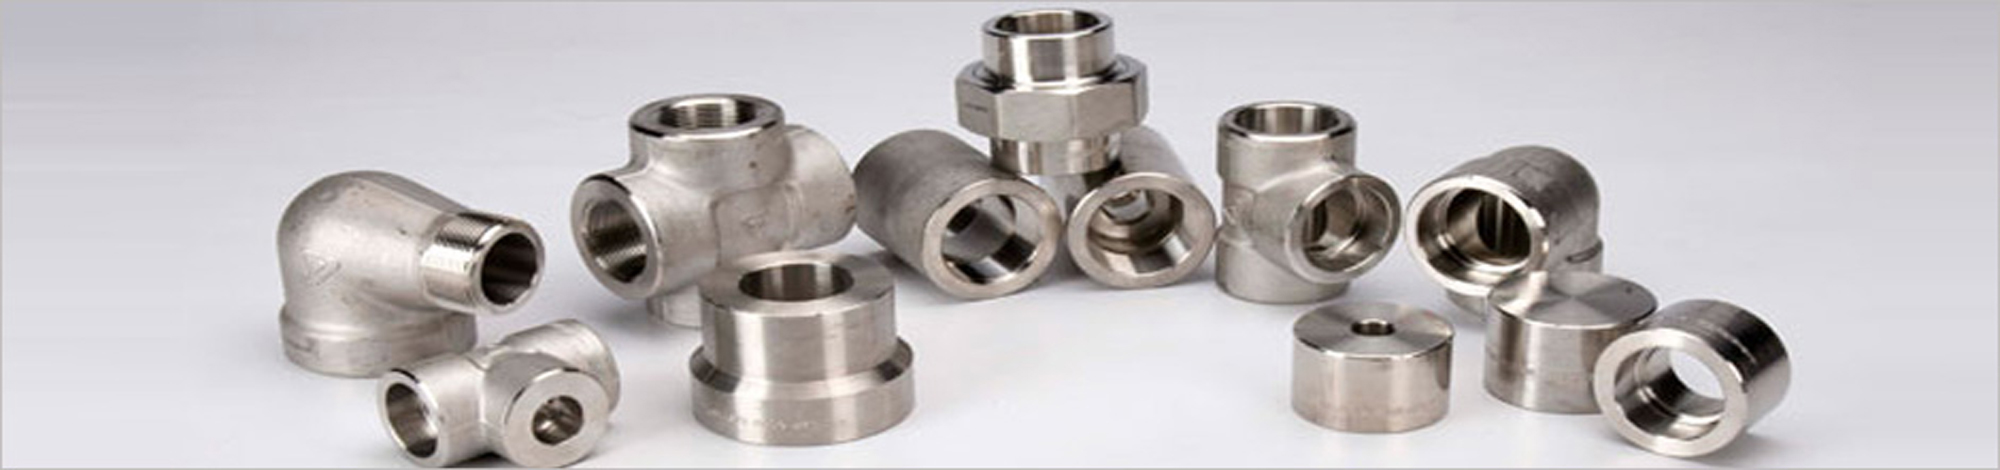 Monel 400 Forged Fittings supplier